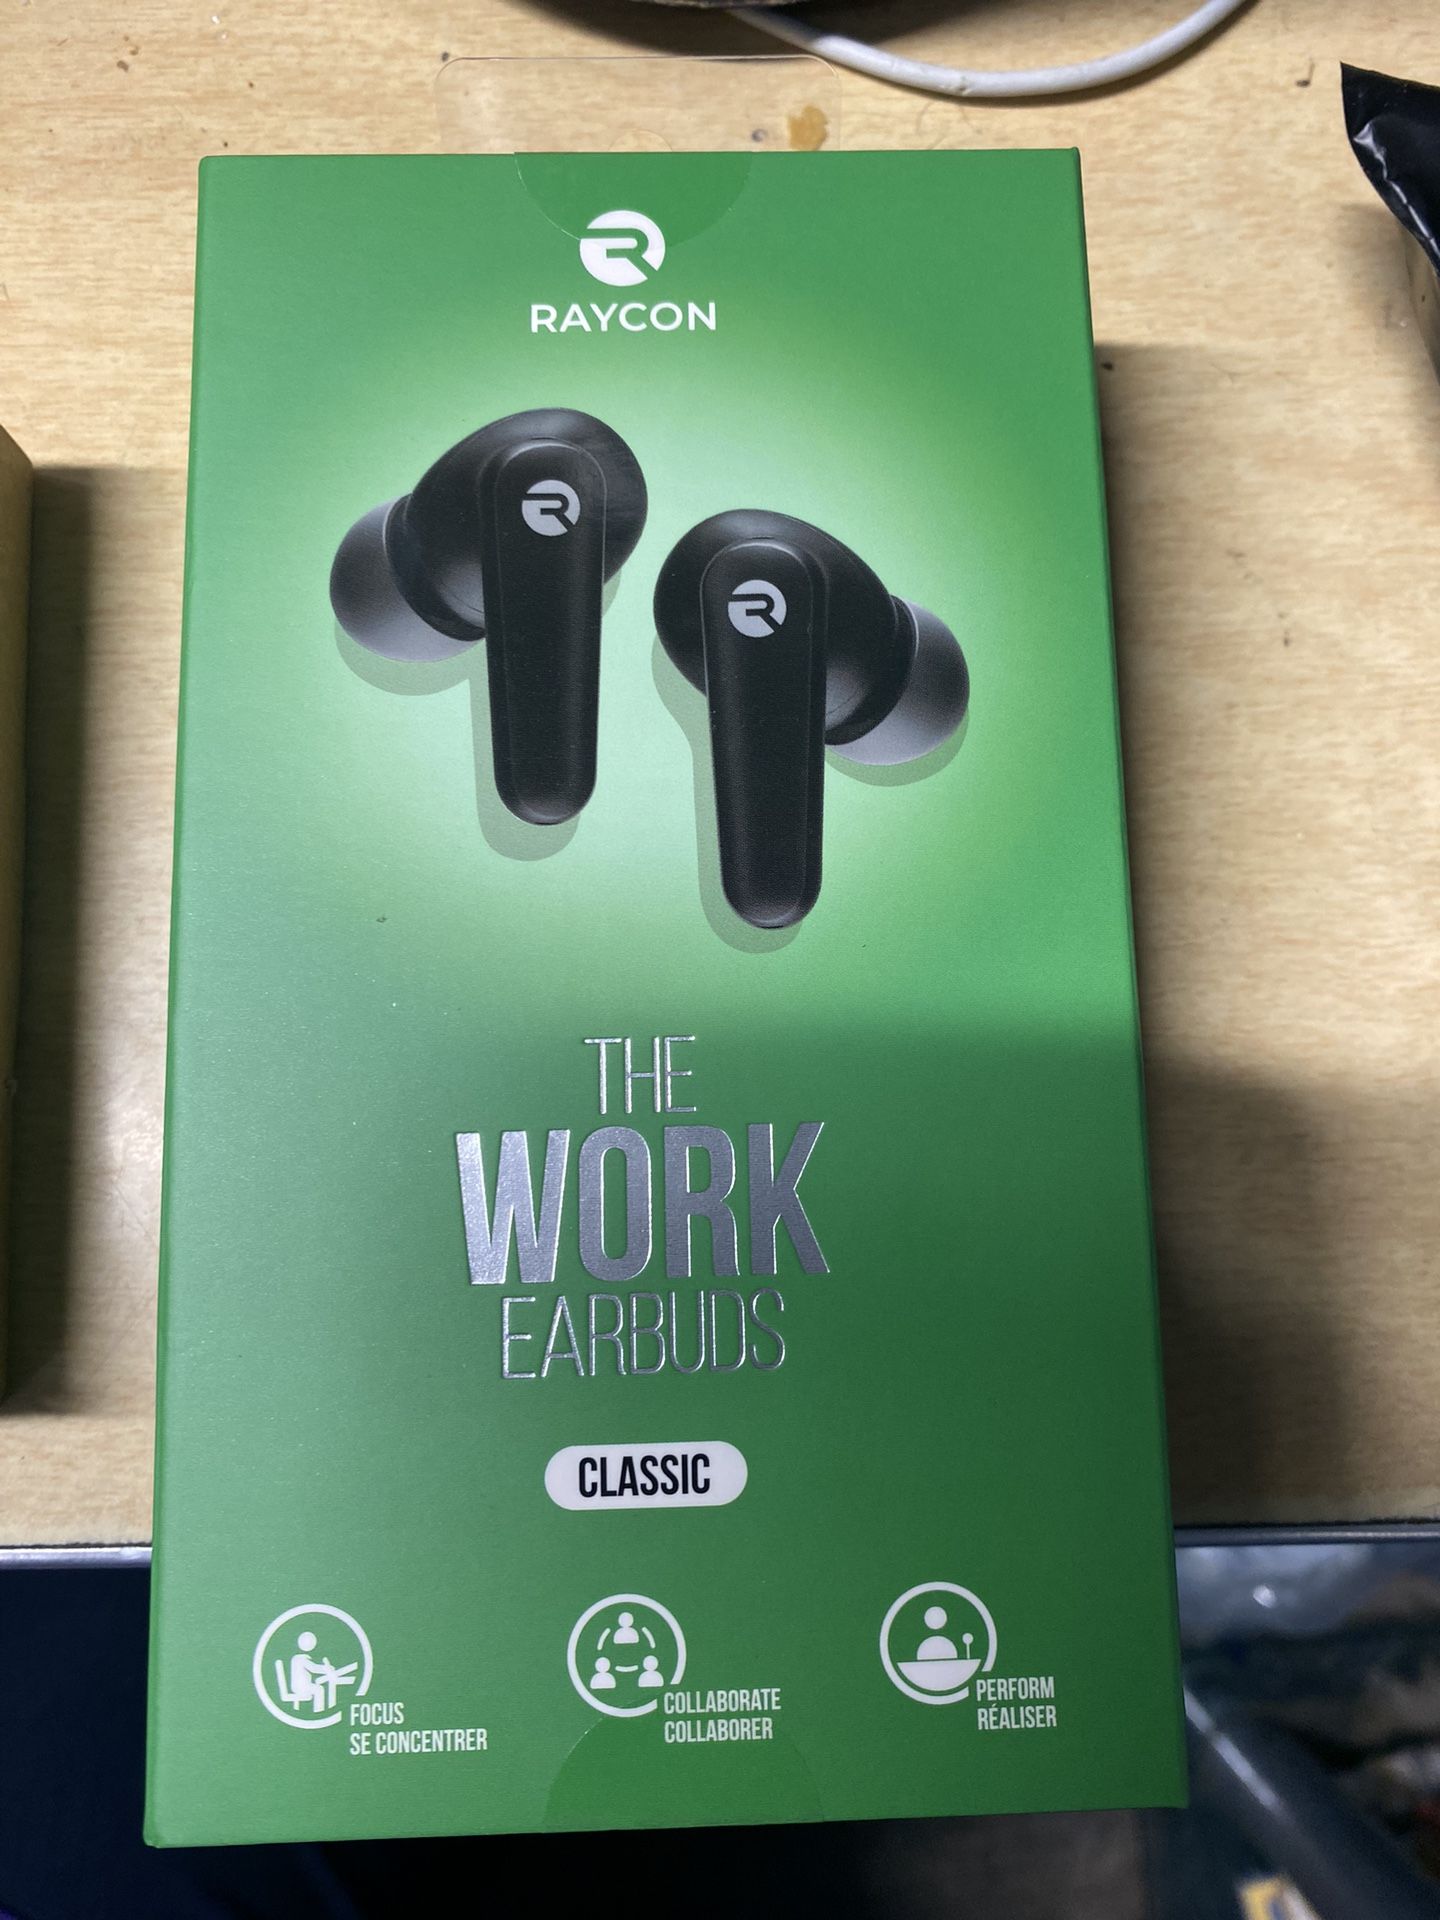 Raycon Earbuds With Leather Bag And Extra Ear Tips